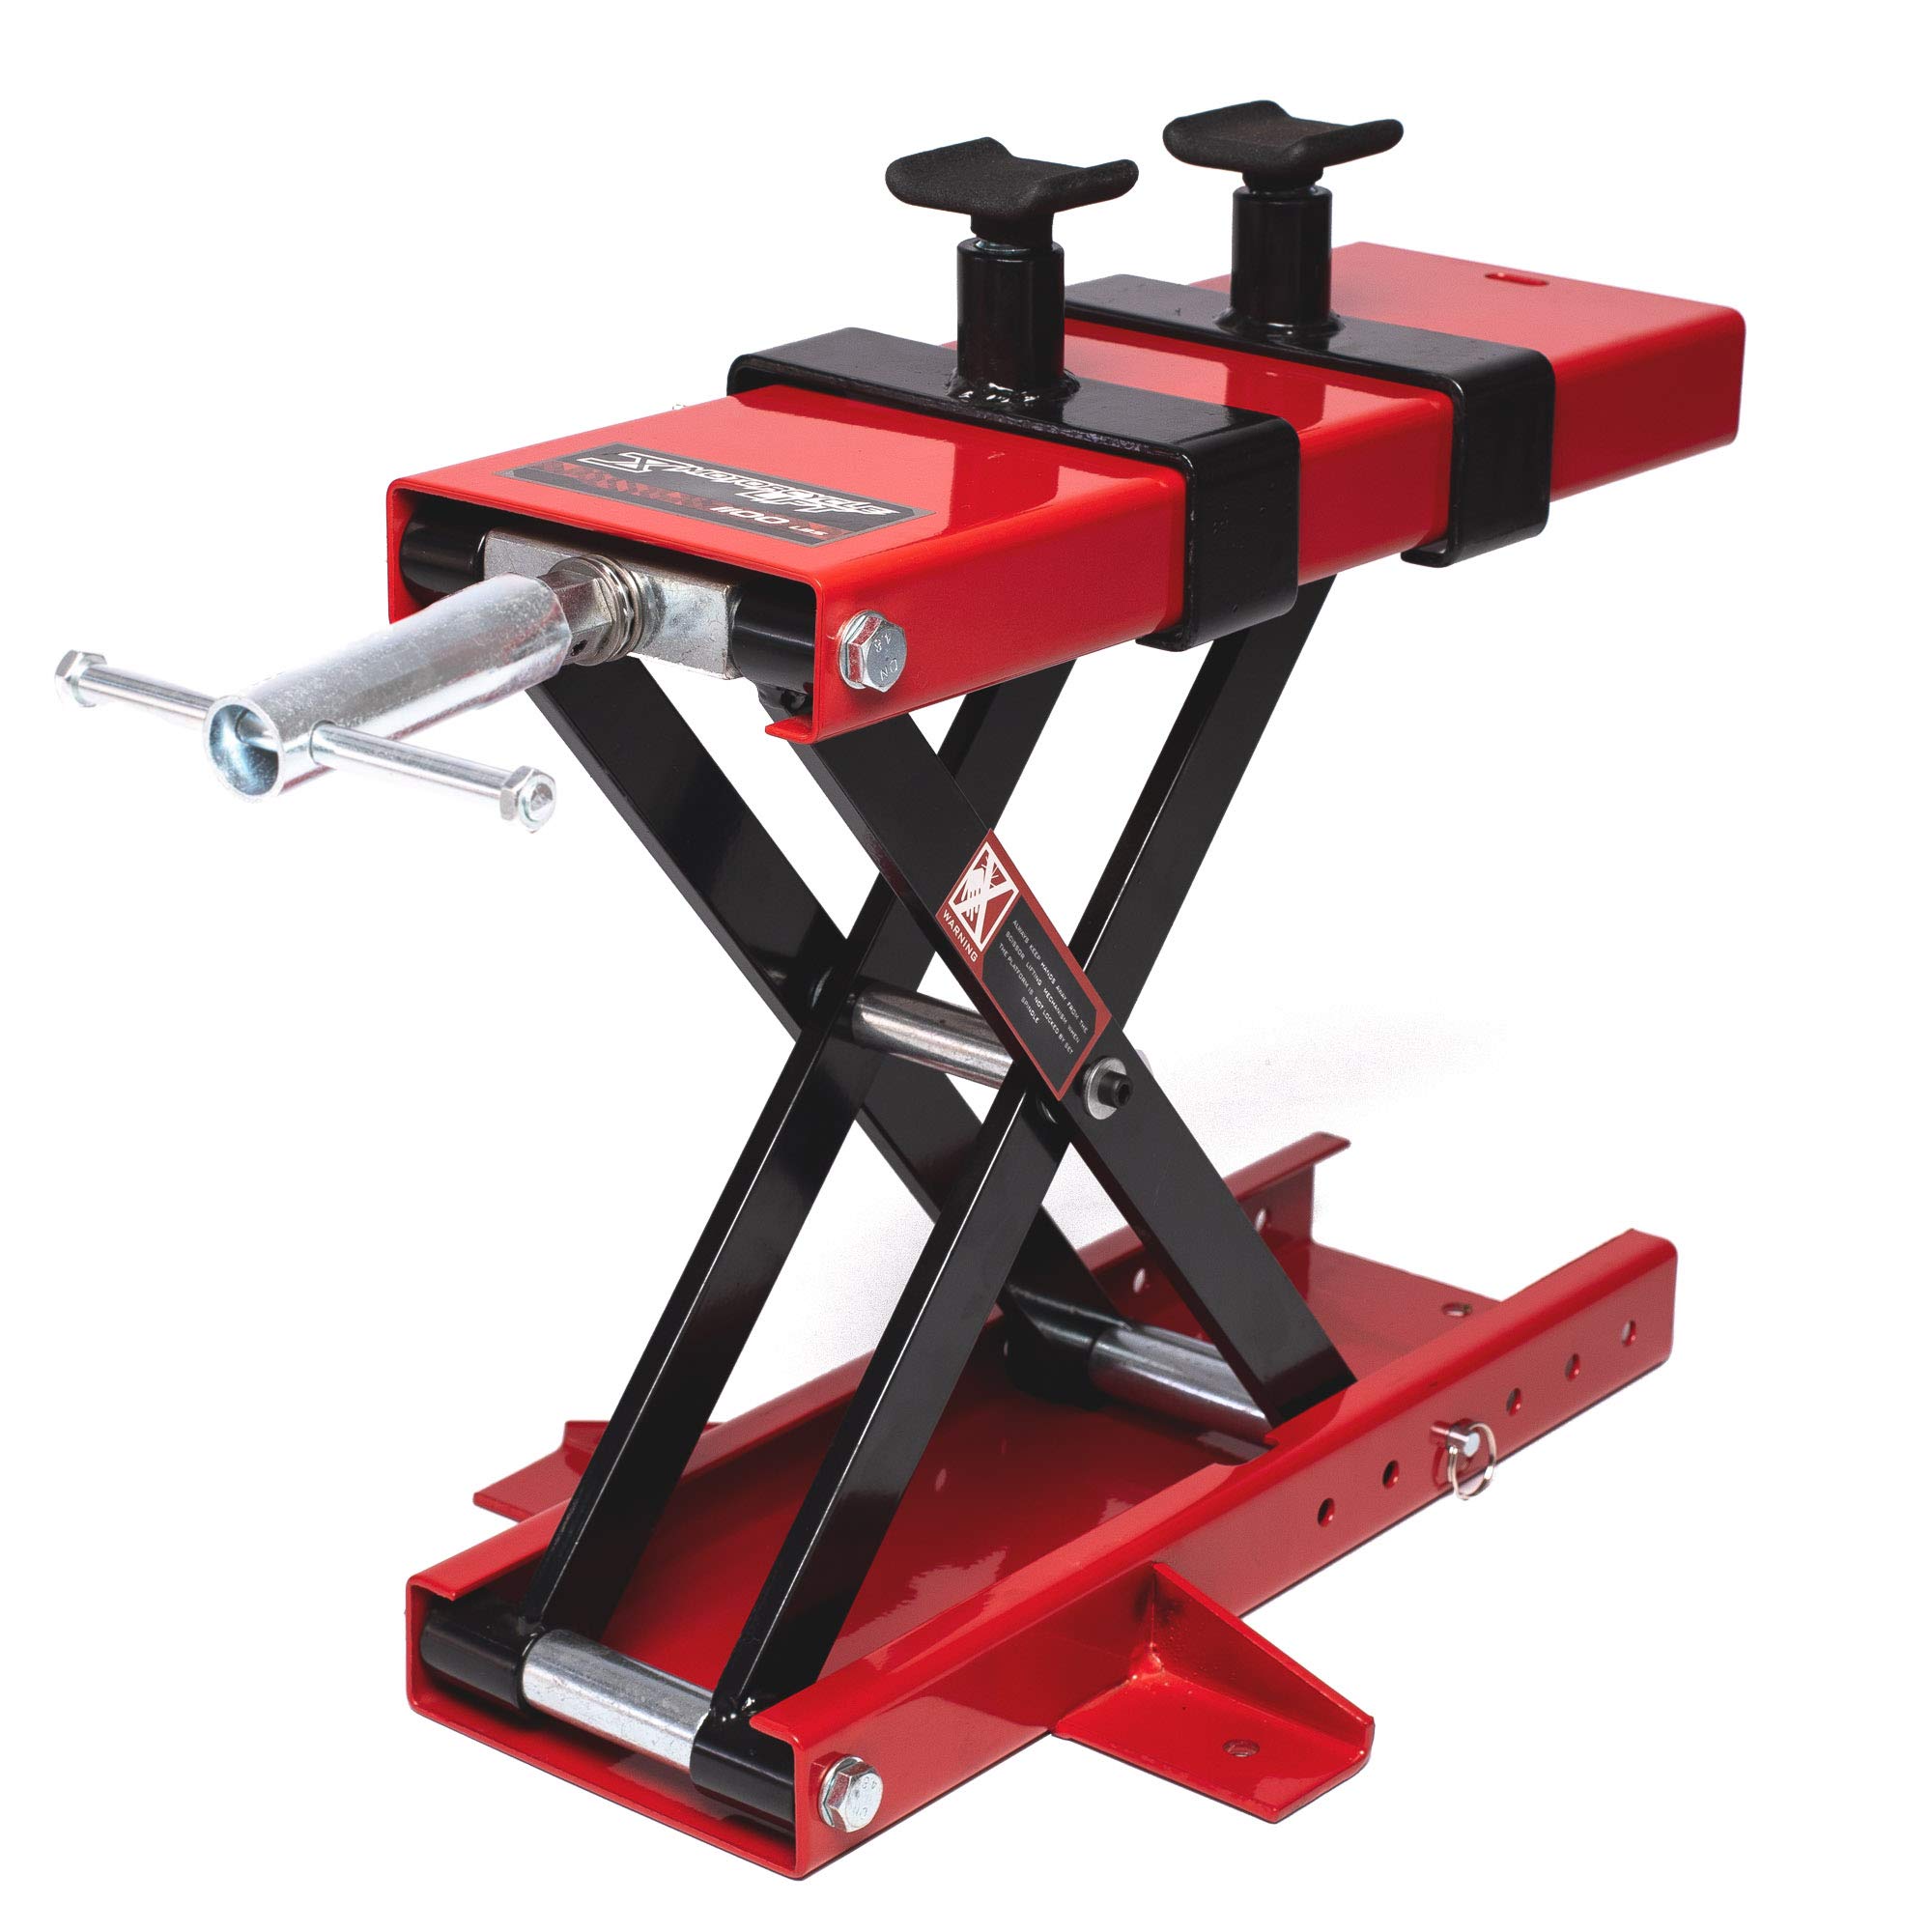 Apextreme 1100 LB Motorcycle Lift Center